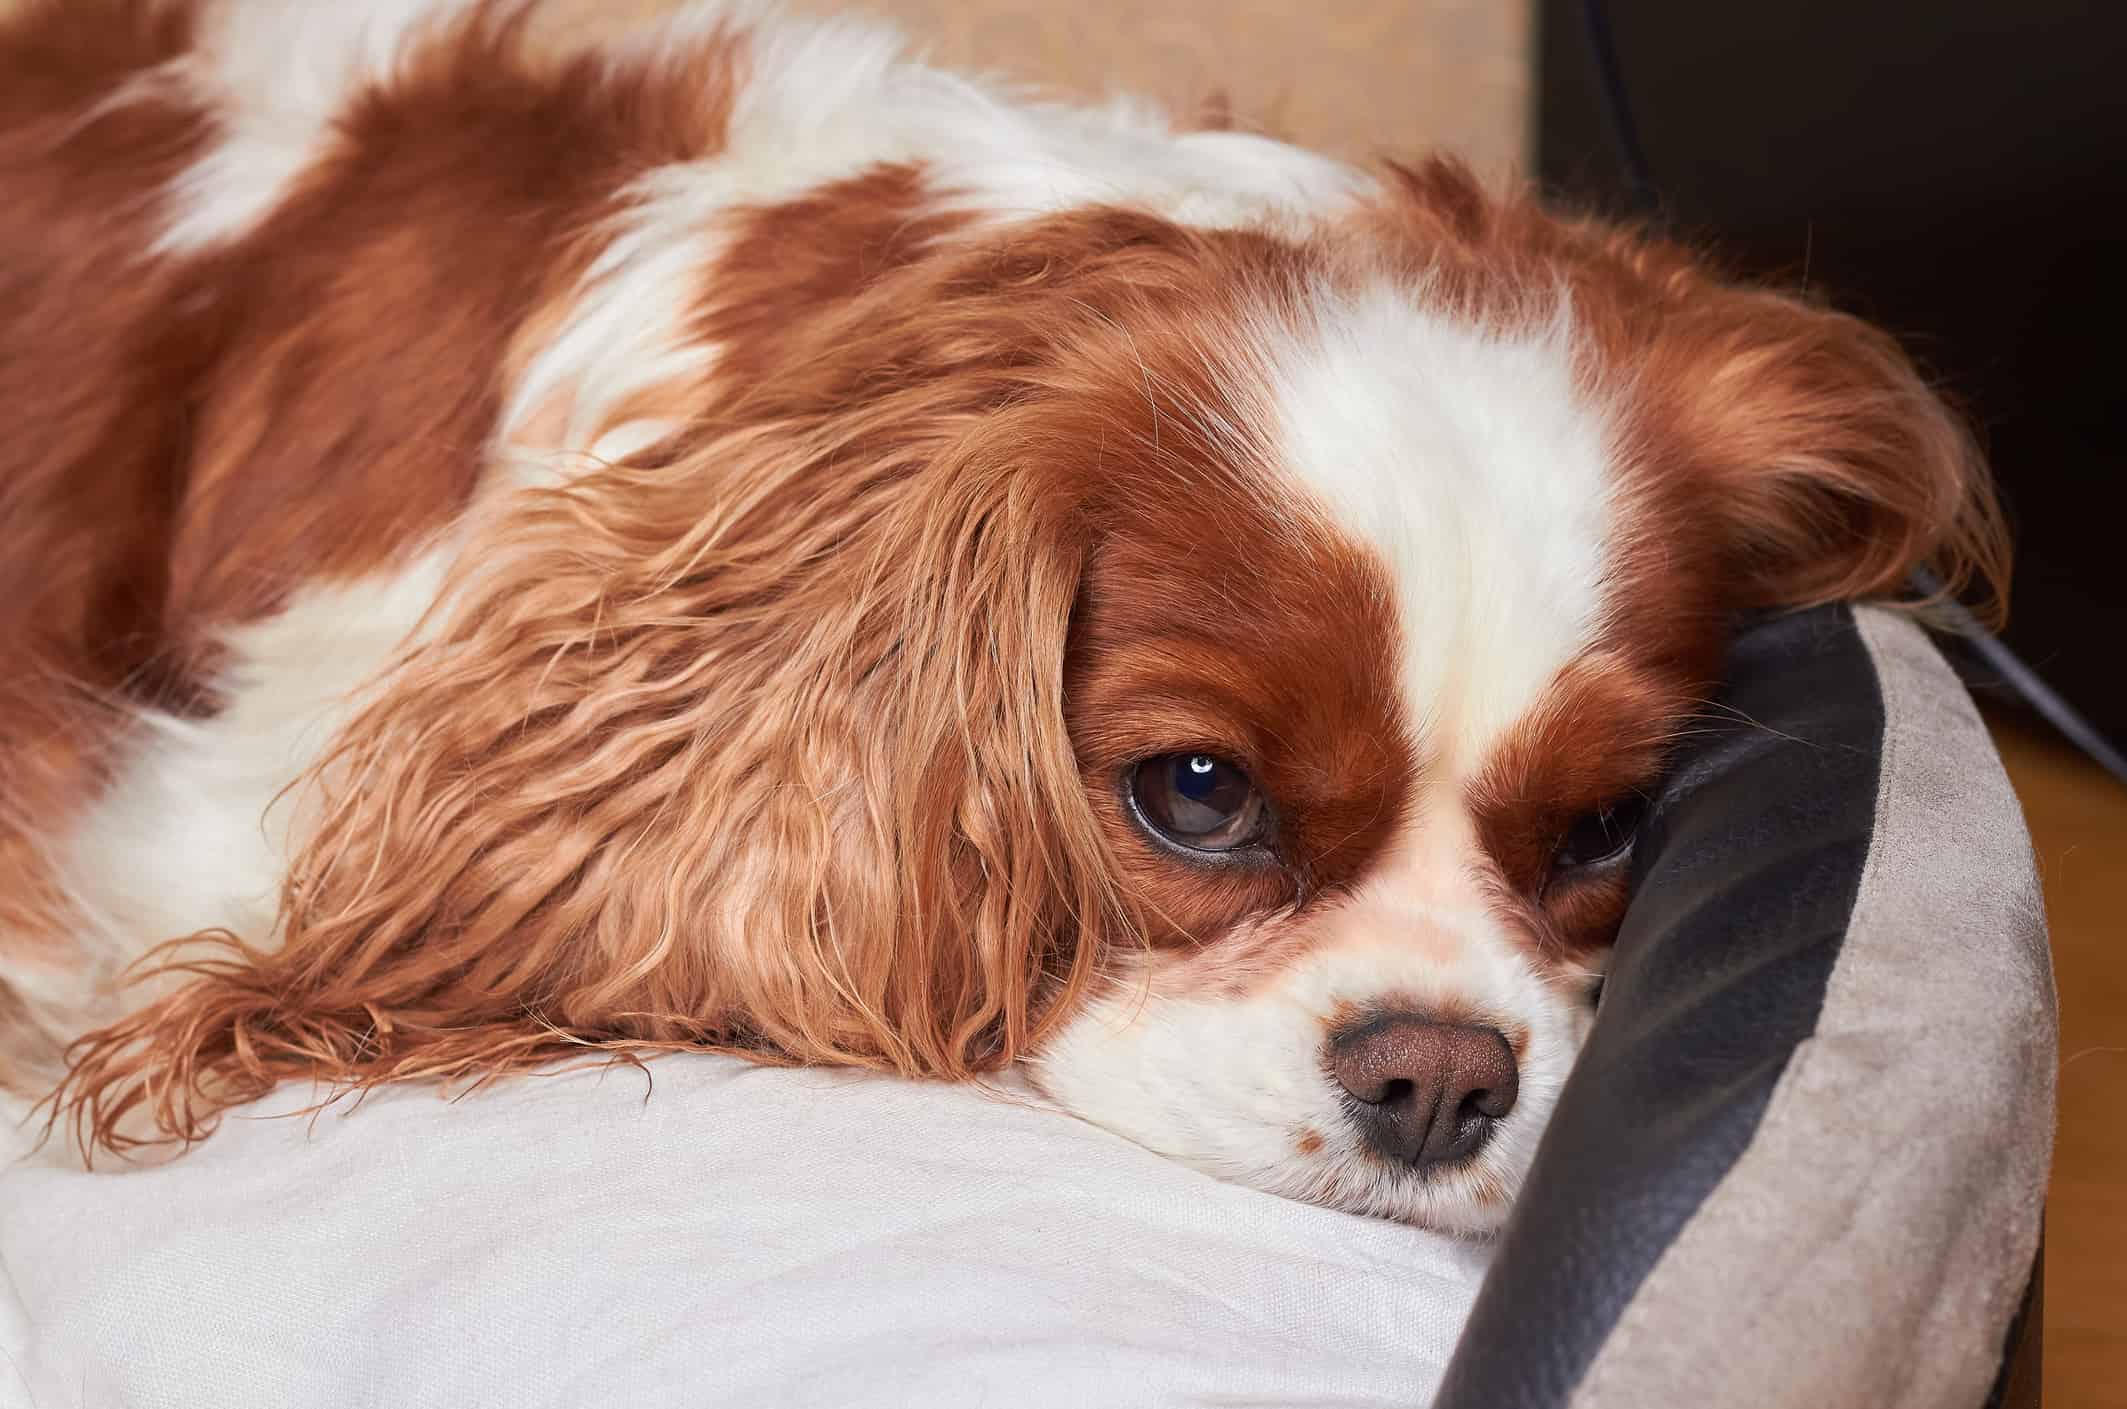 The little dog Cavalier King Charles Spaniel is lying on the floor. Beautiful Purebred Cavalier King Charles Cavalier Spaniel Dog